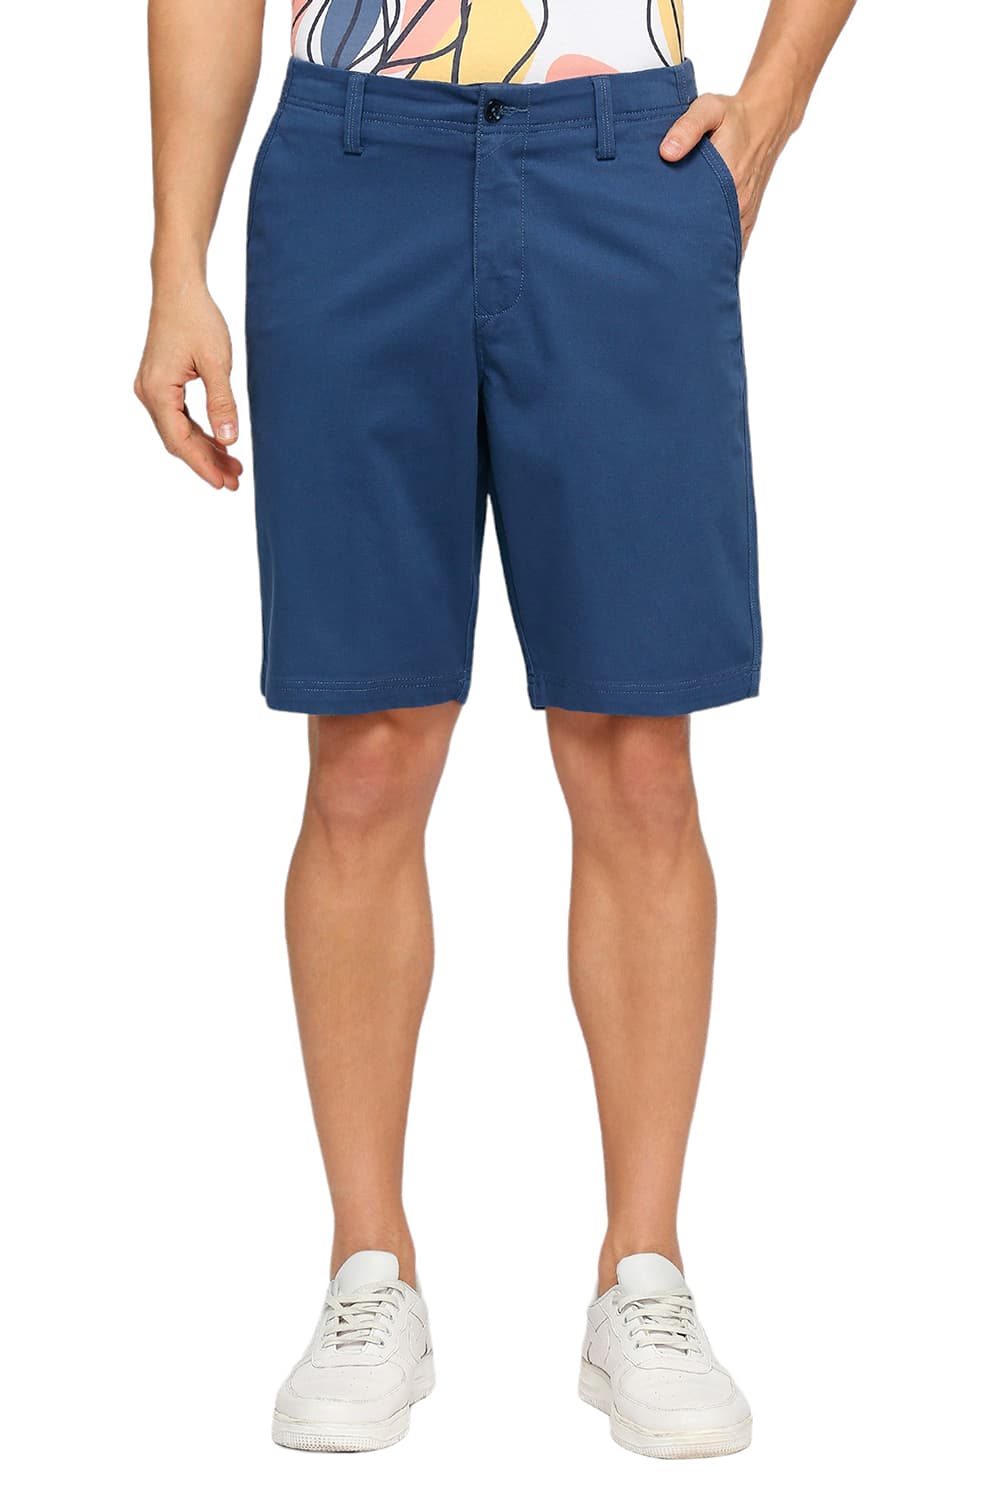 BASICS COMFORT FIT COTTON STRETCH DOBBY WOVEN SHORTS